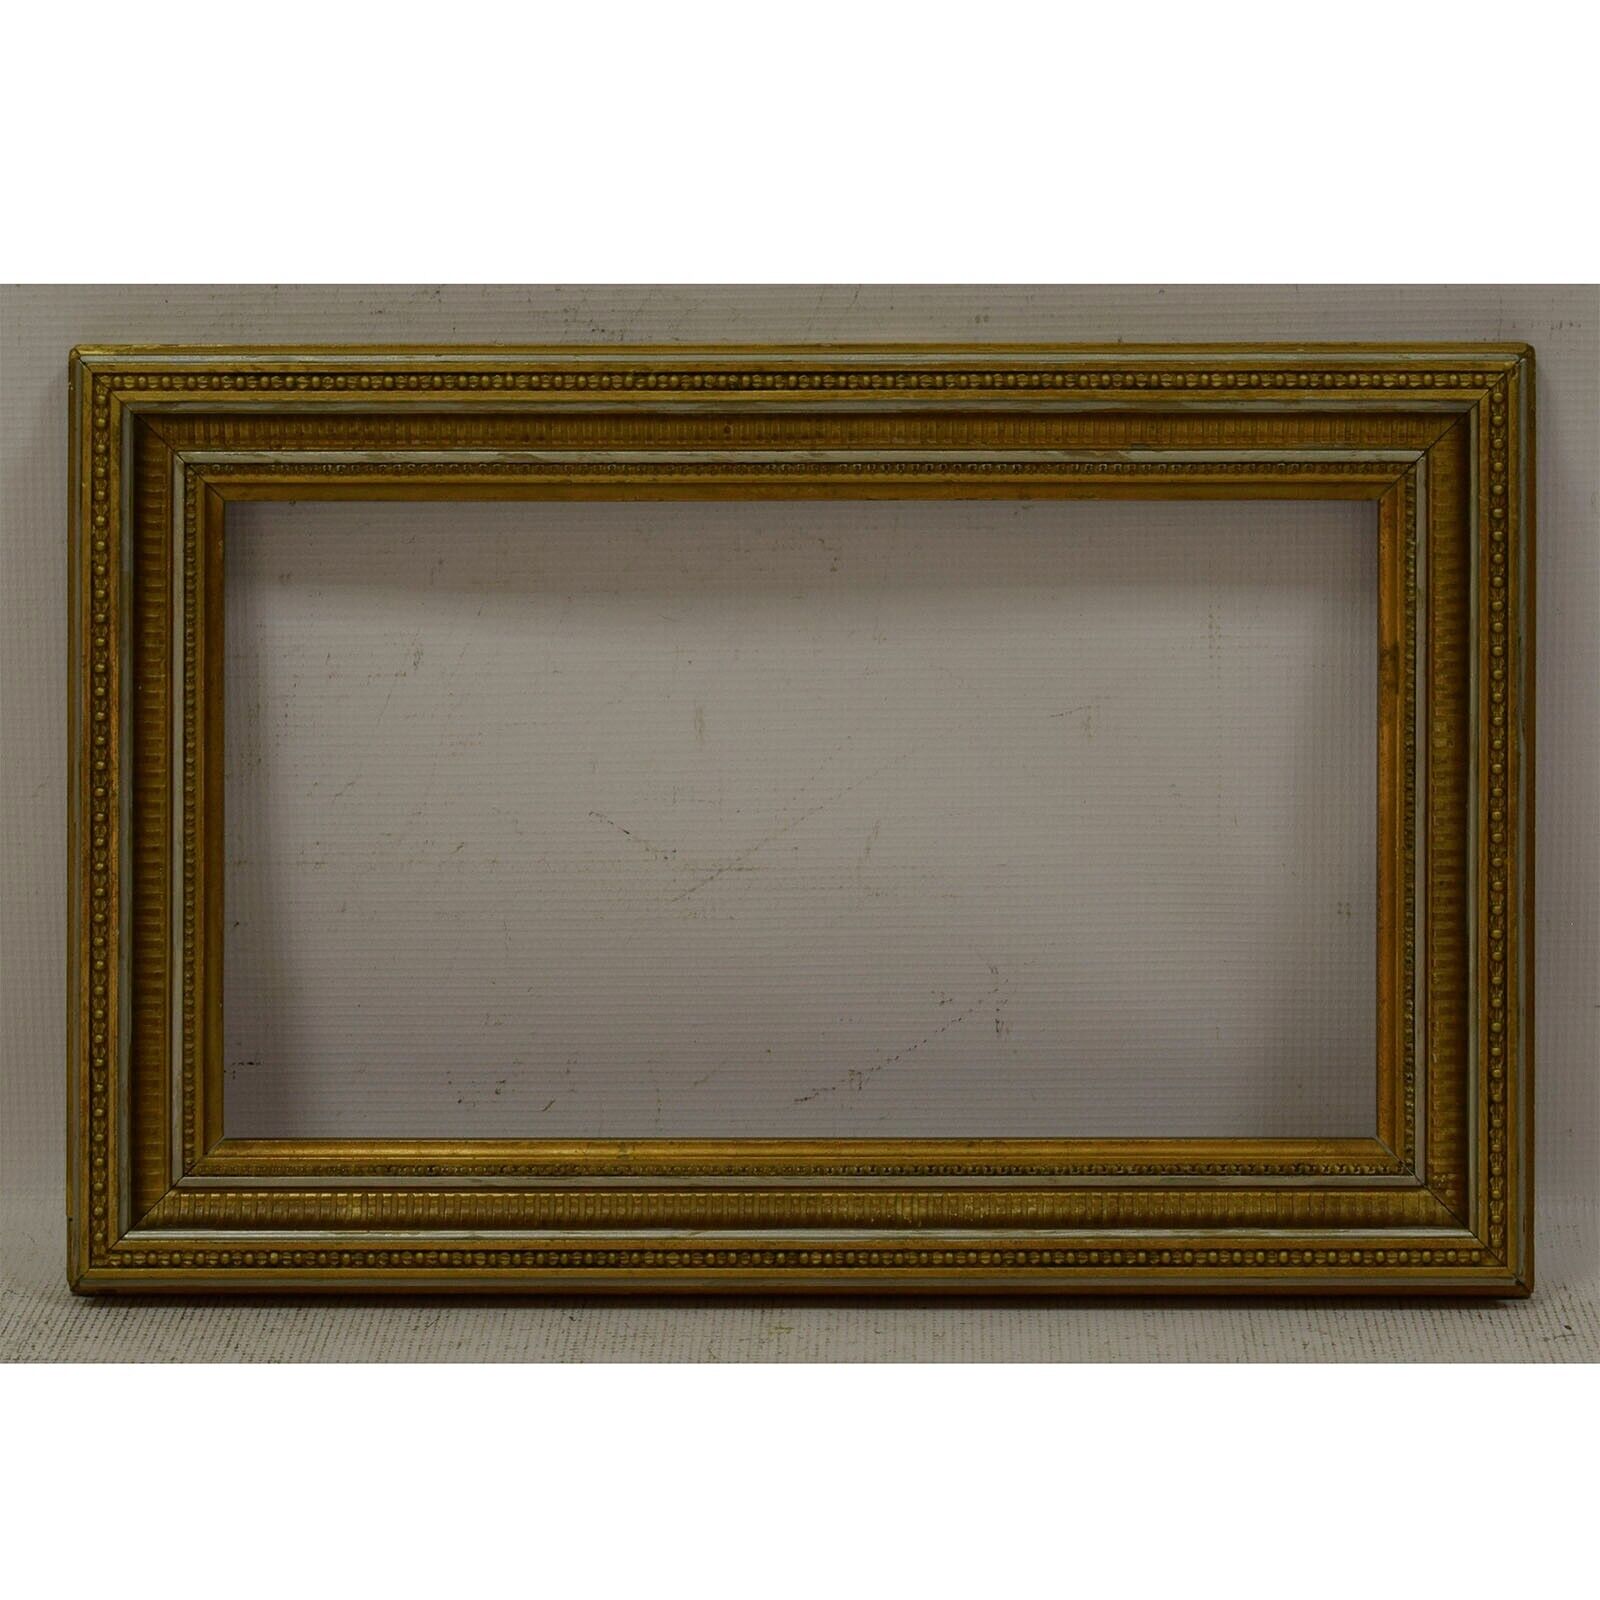 1909 Old wooden frame original condition gold painted Internal: 14 x 8.1 in